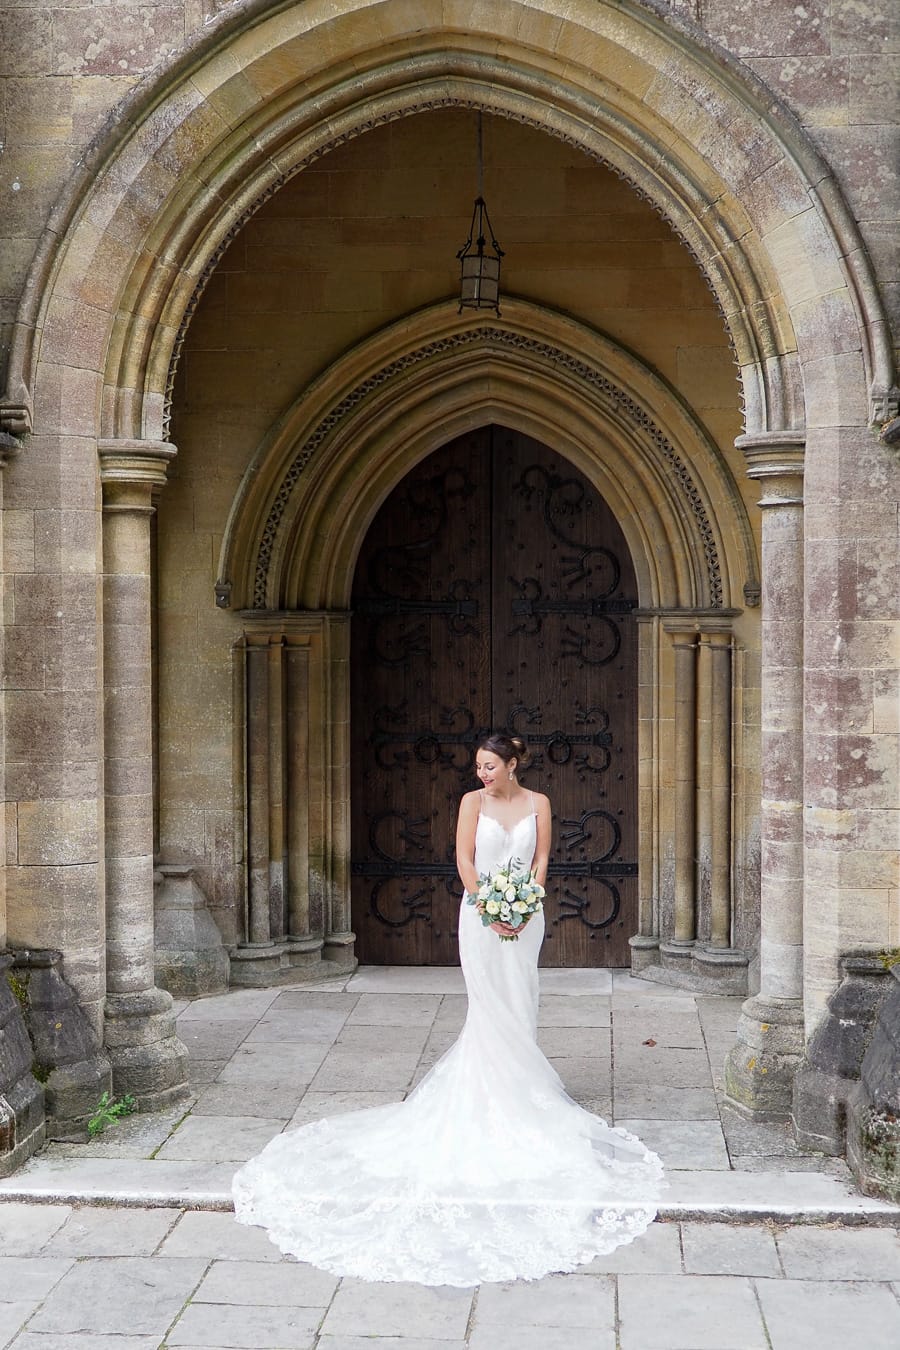 Romantic Romsey, olde worlde charm for a Hampshire wedding, with Dom Brenton Photography (7)